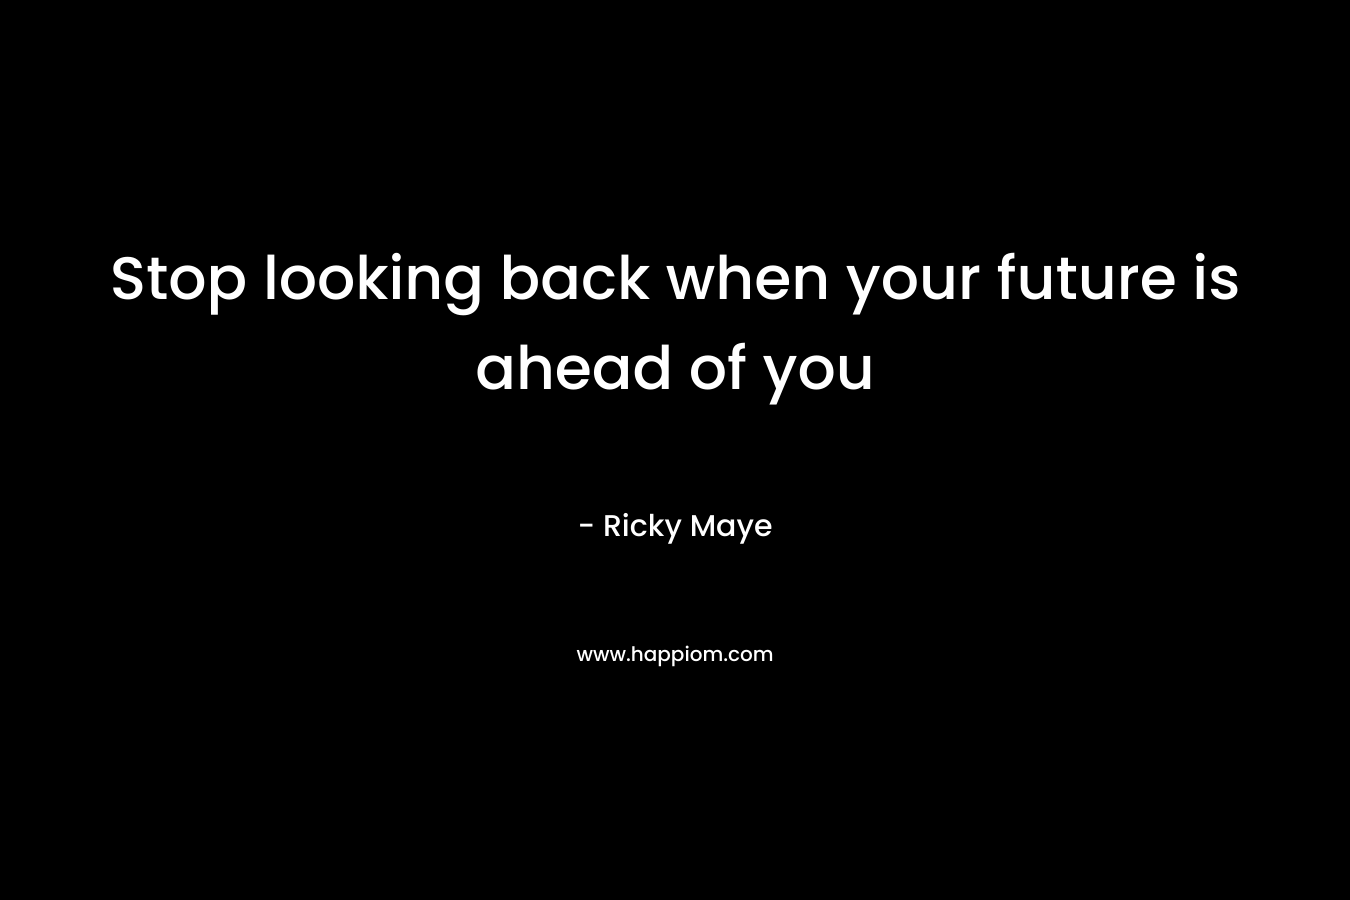 Stop looking back when your future is ahead of you